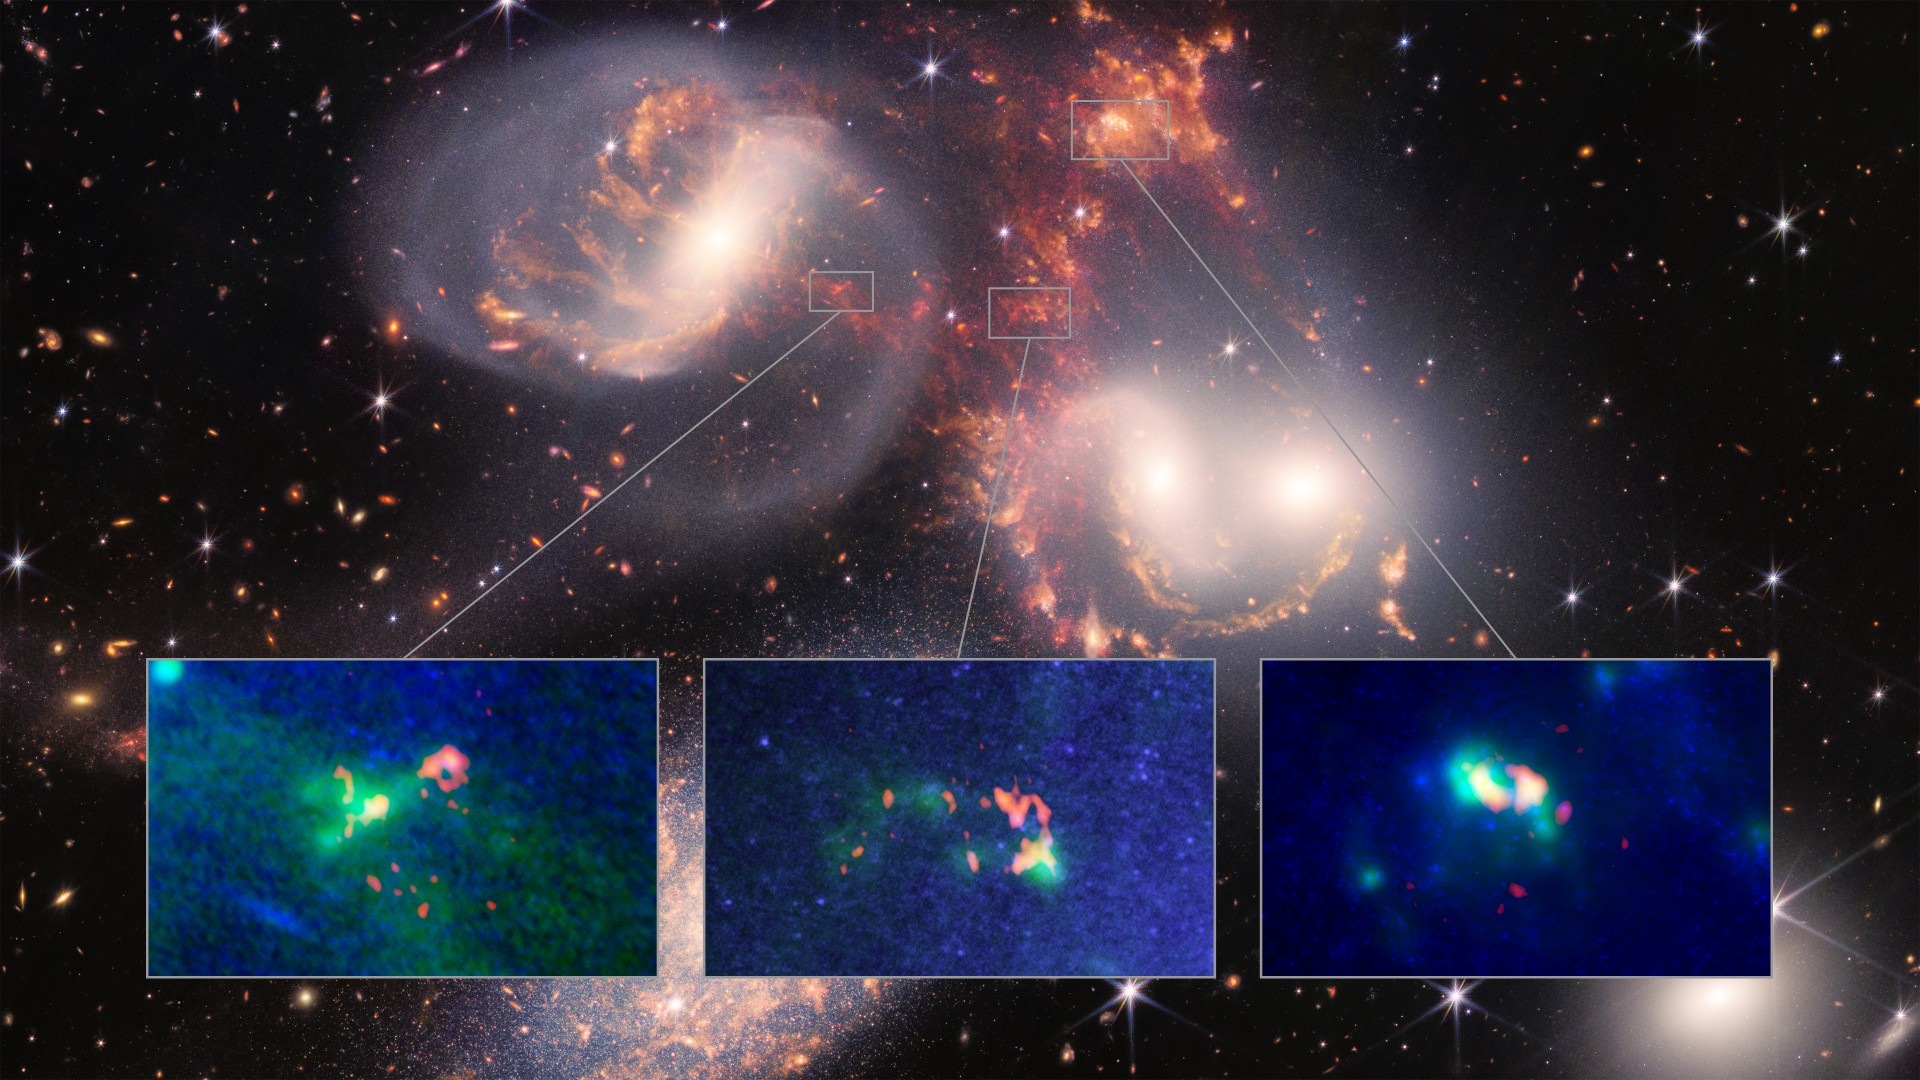 James Webb Space Telescope spies massive shockwave and baby dwarf galaxy in Stephan's Quintet